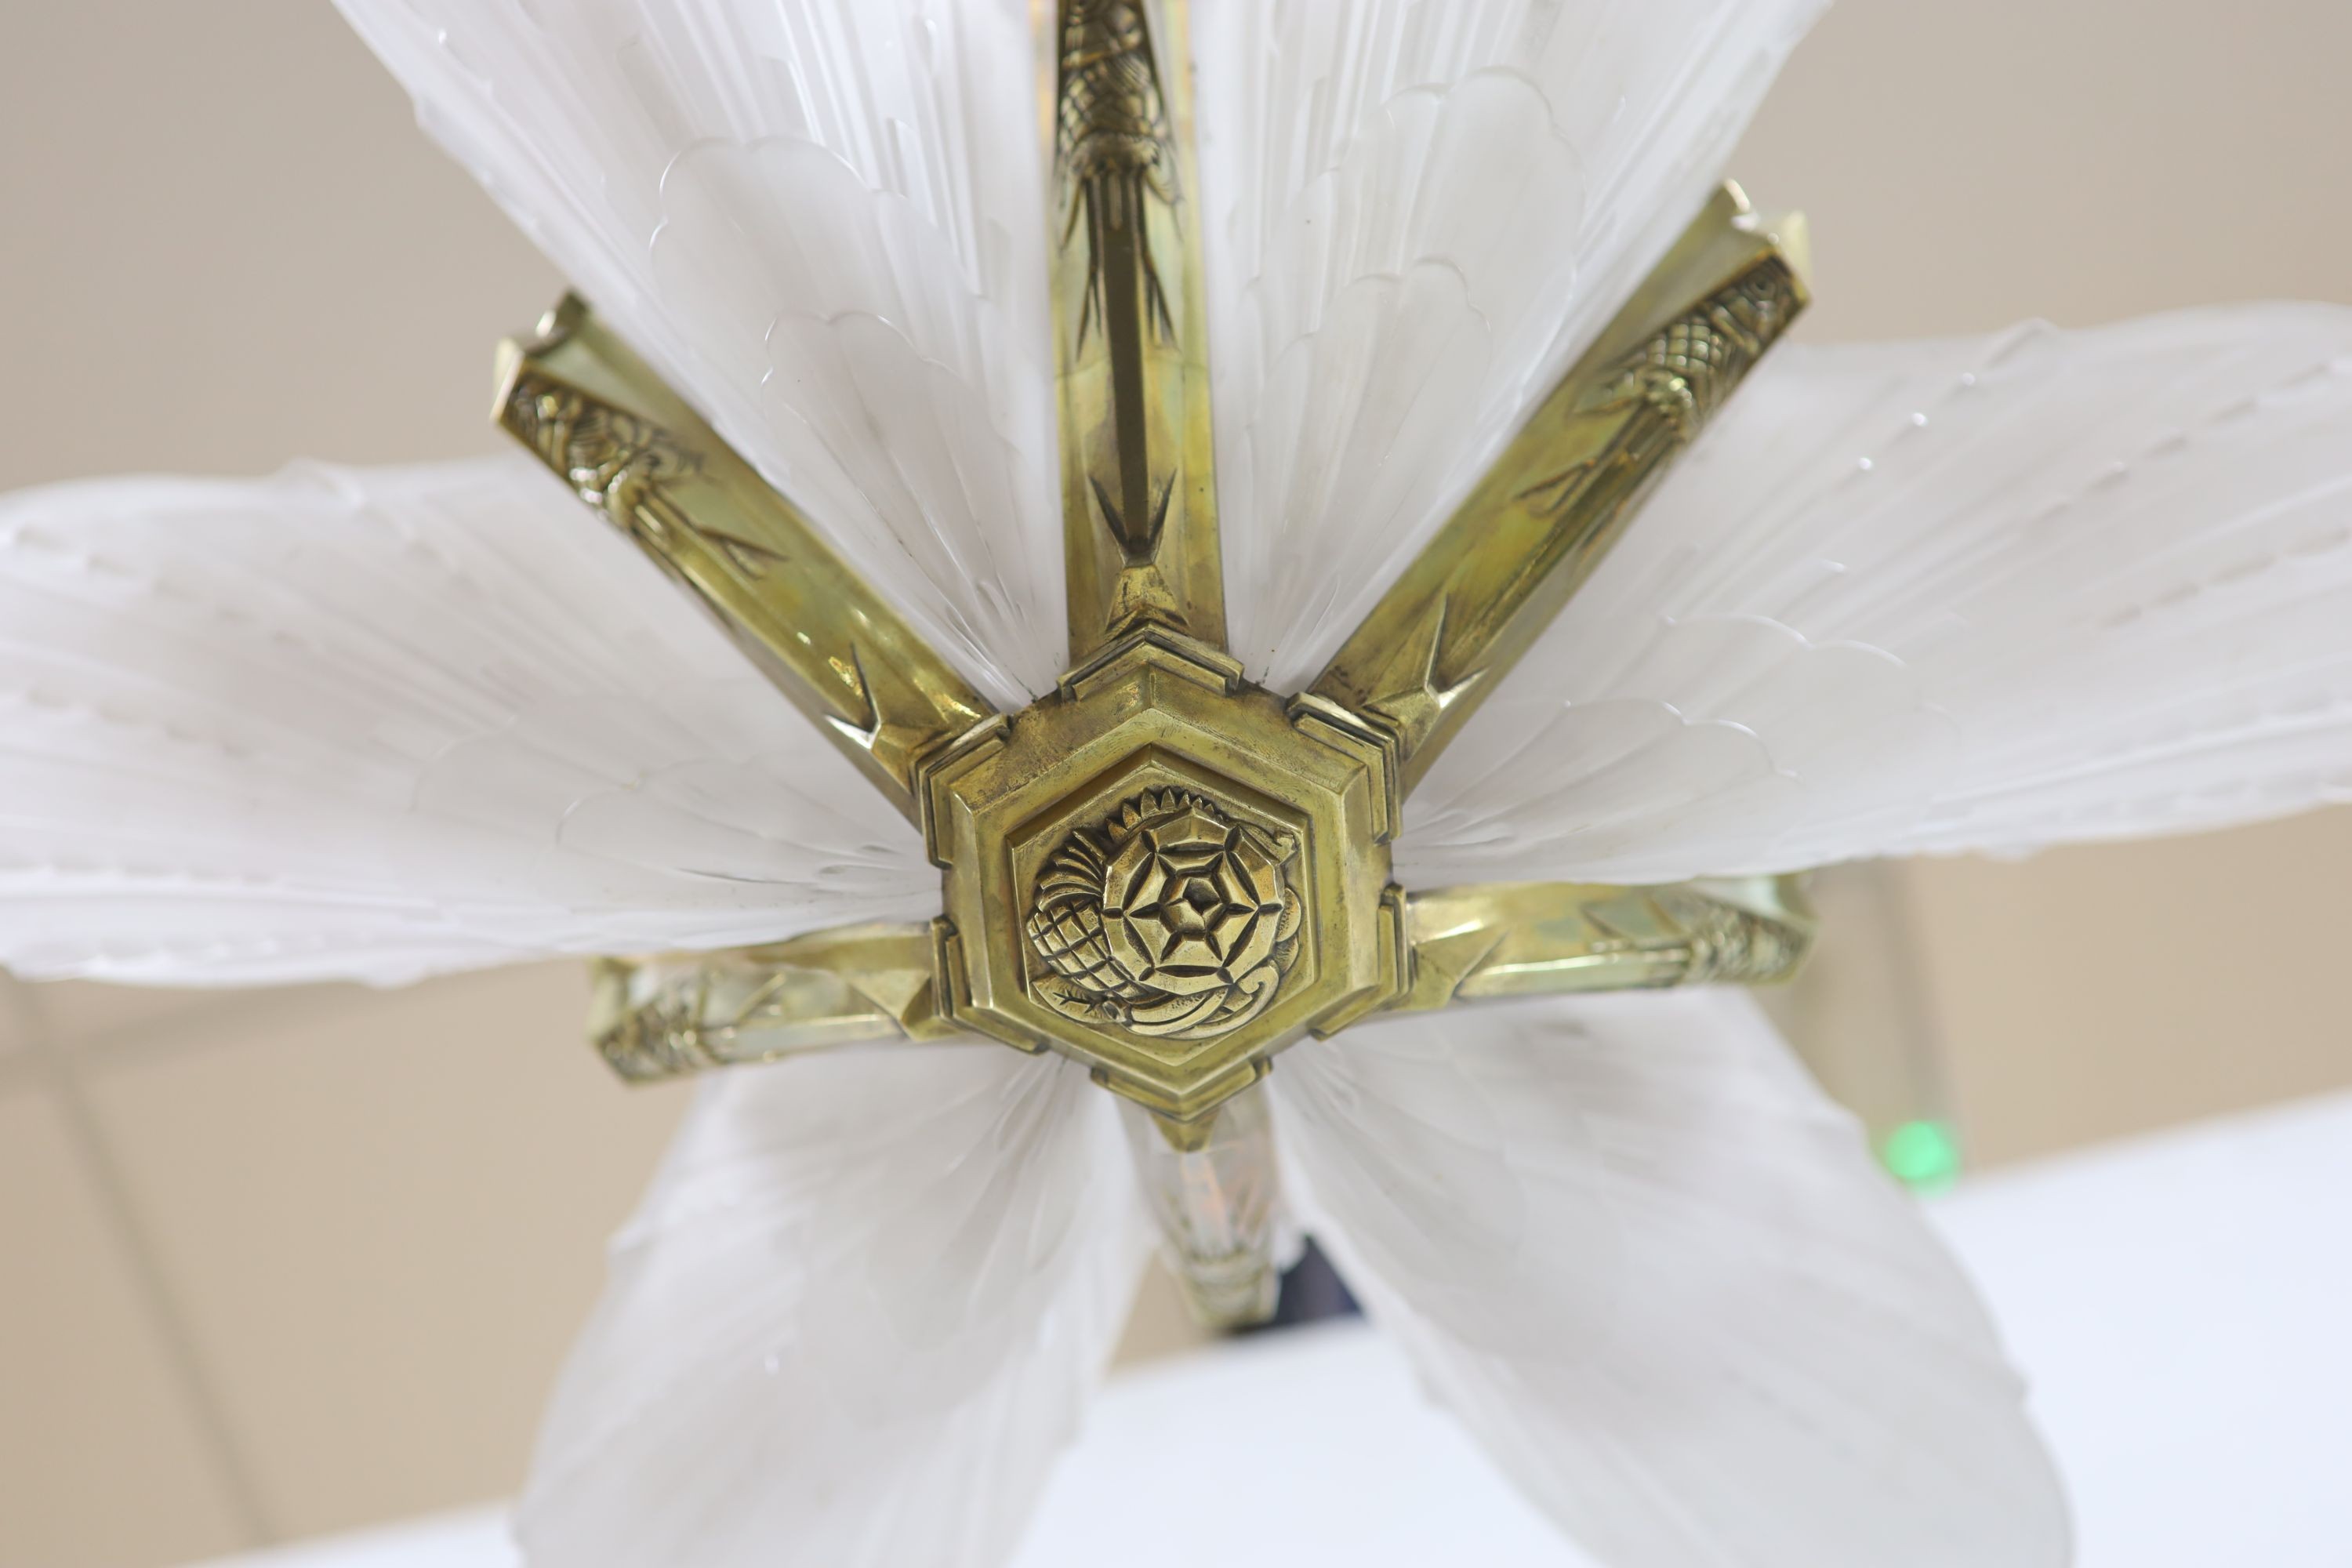 An Art Deco style large frosted glass and brass handing ceiling light 80cm drop